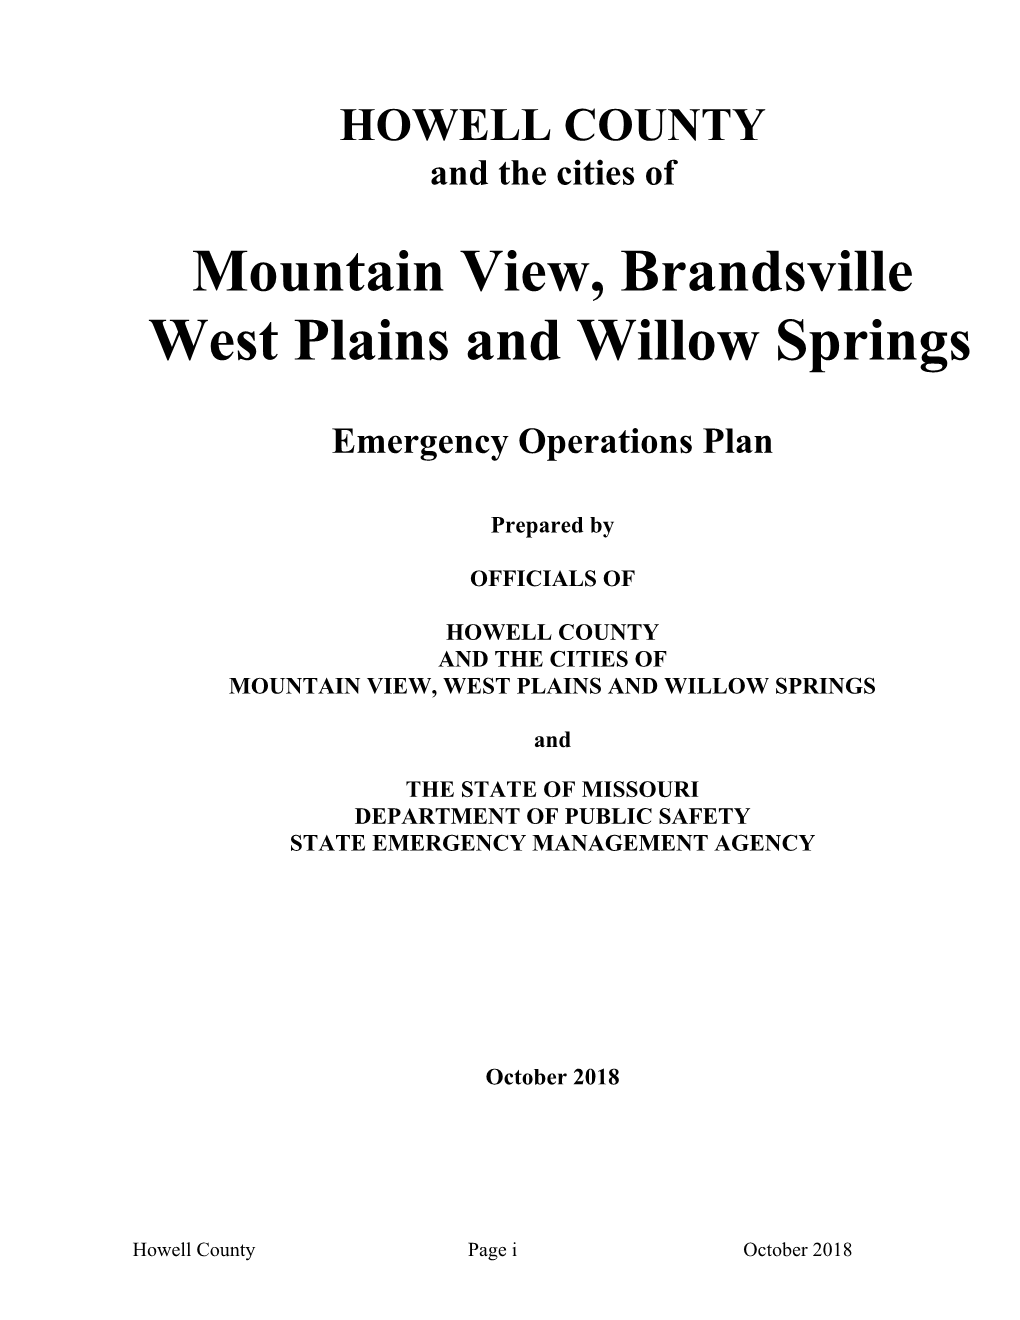 Mountain View, Brandsville West Plains and Willow Springs